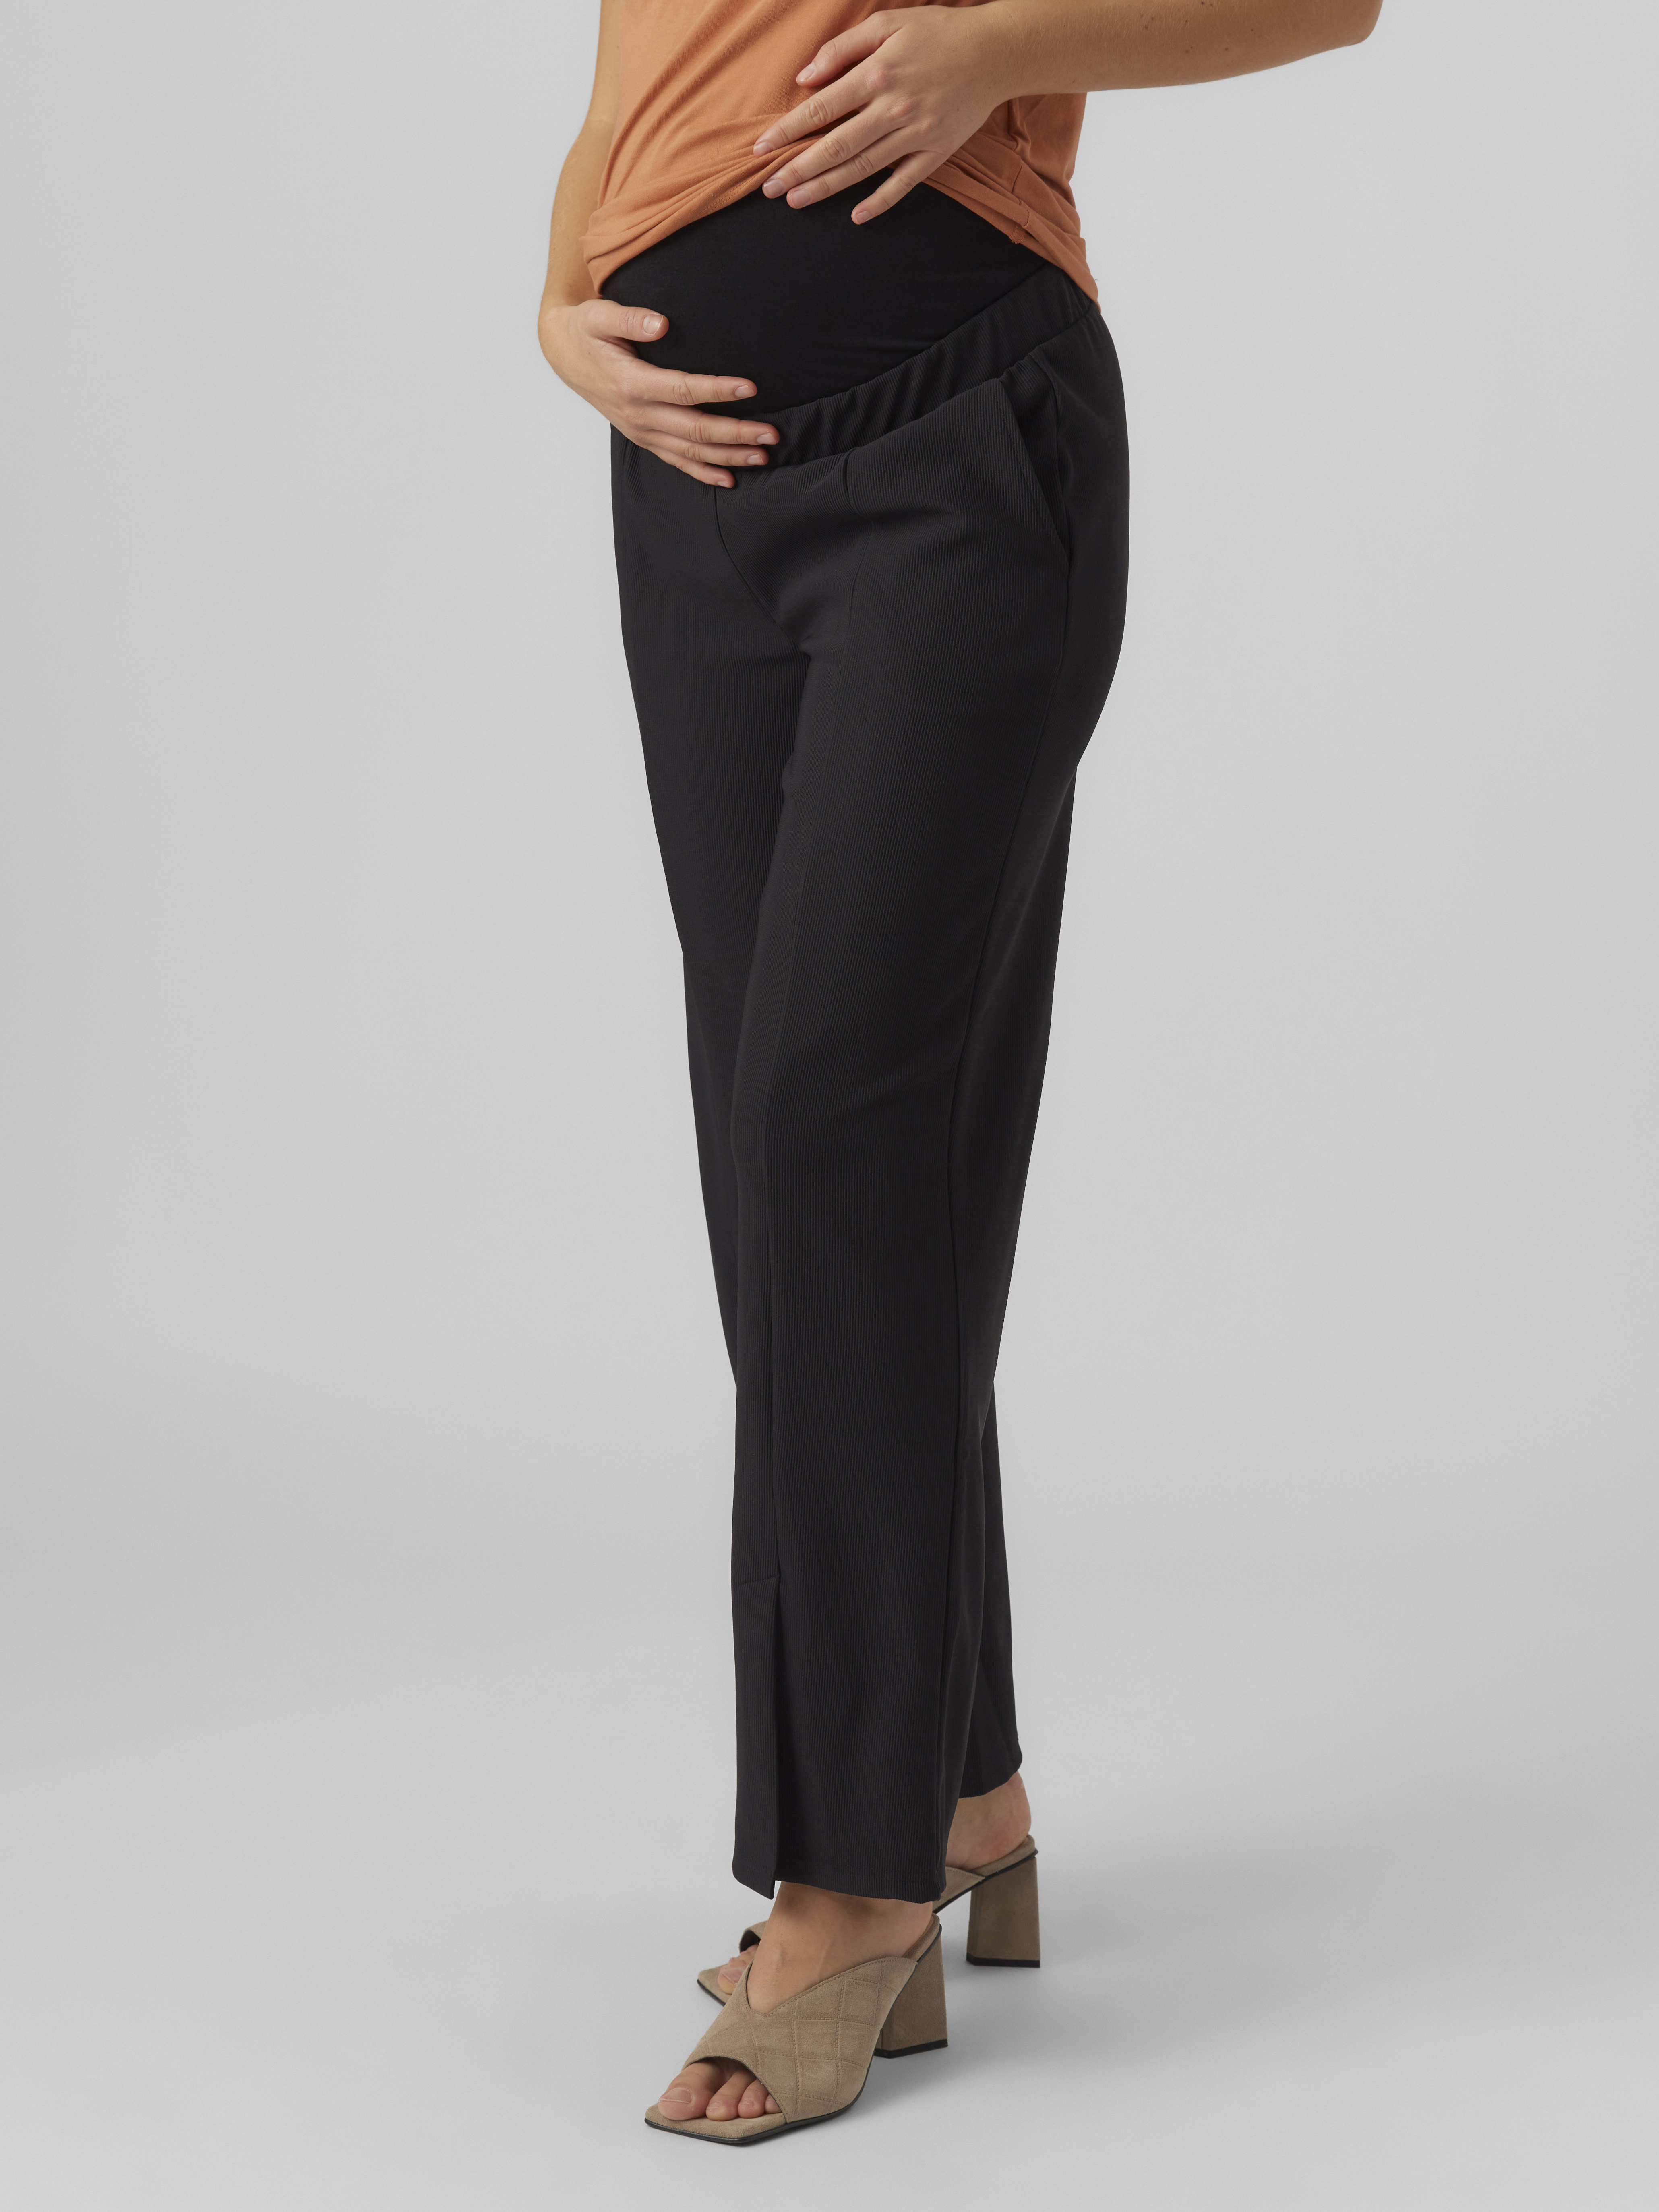 MAMA.LICIOUS Wide Leg Fit Trousers -Black - 20017802